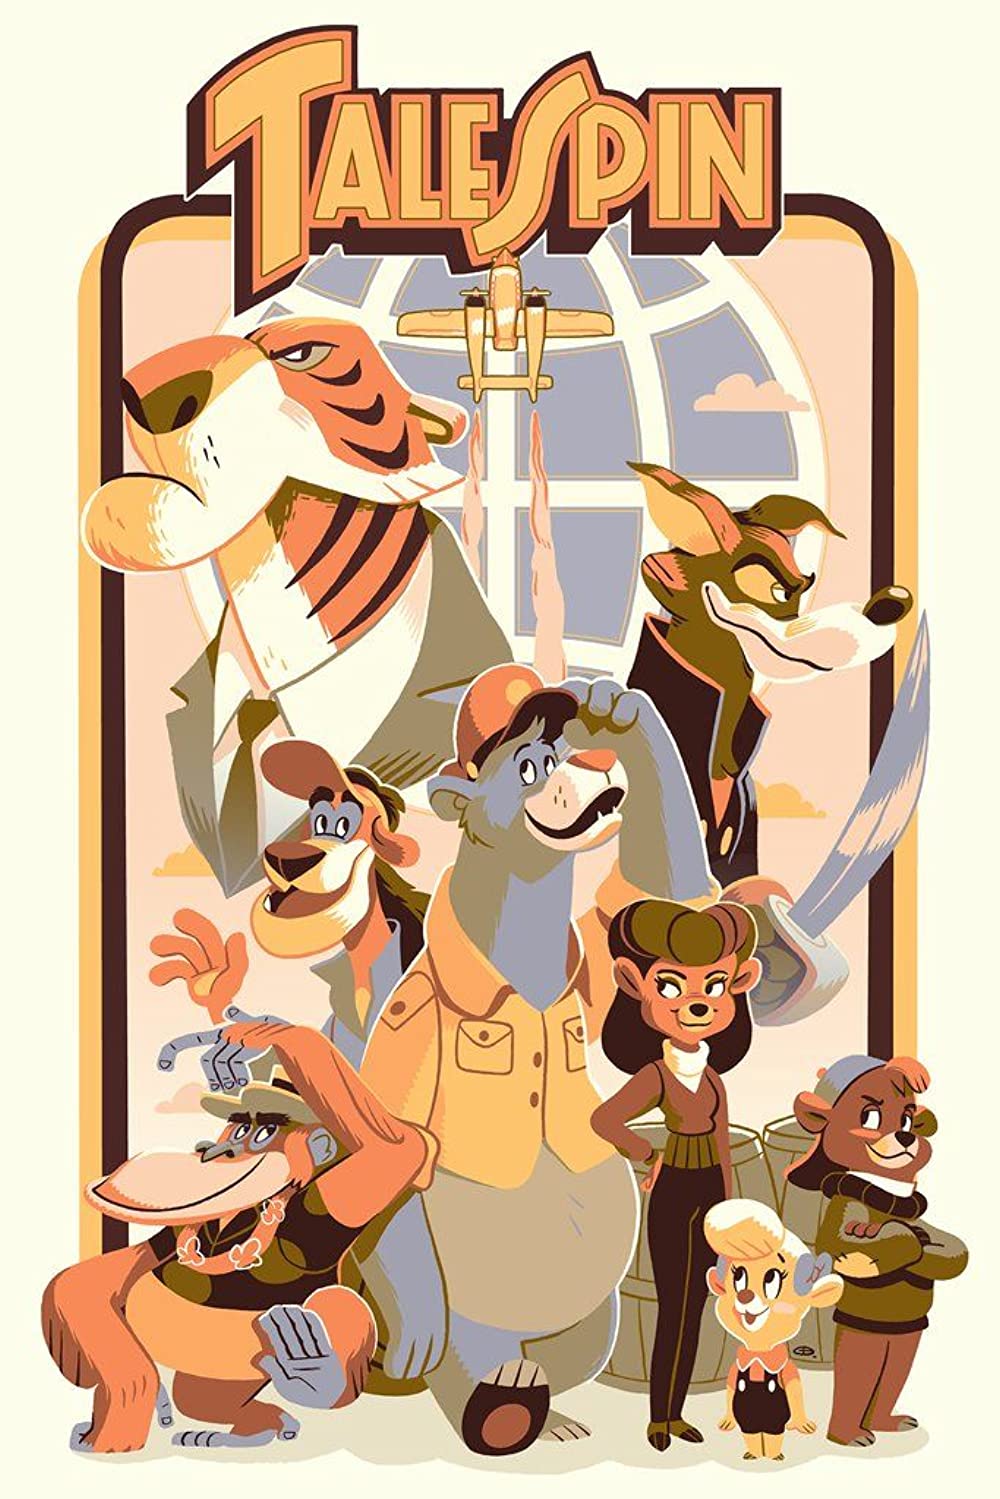 TaleSpin is one of cartoons from the 90's